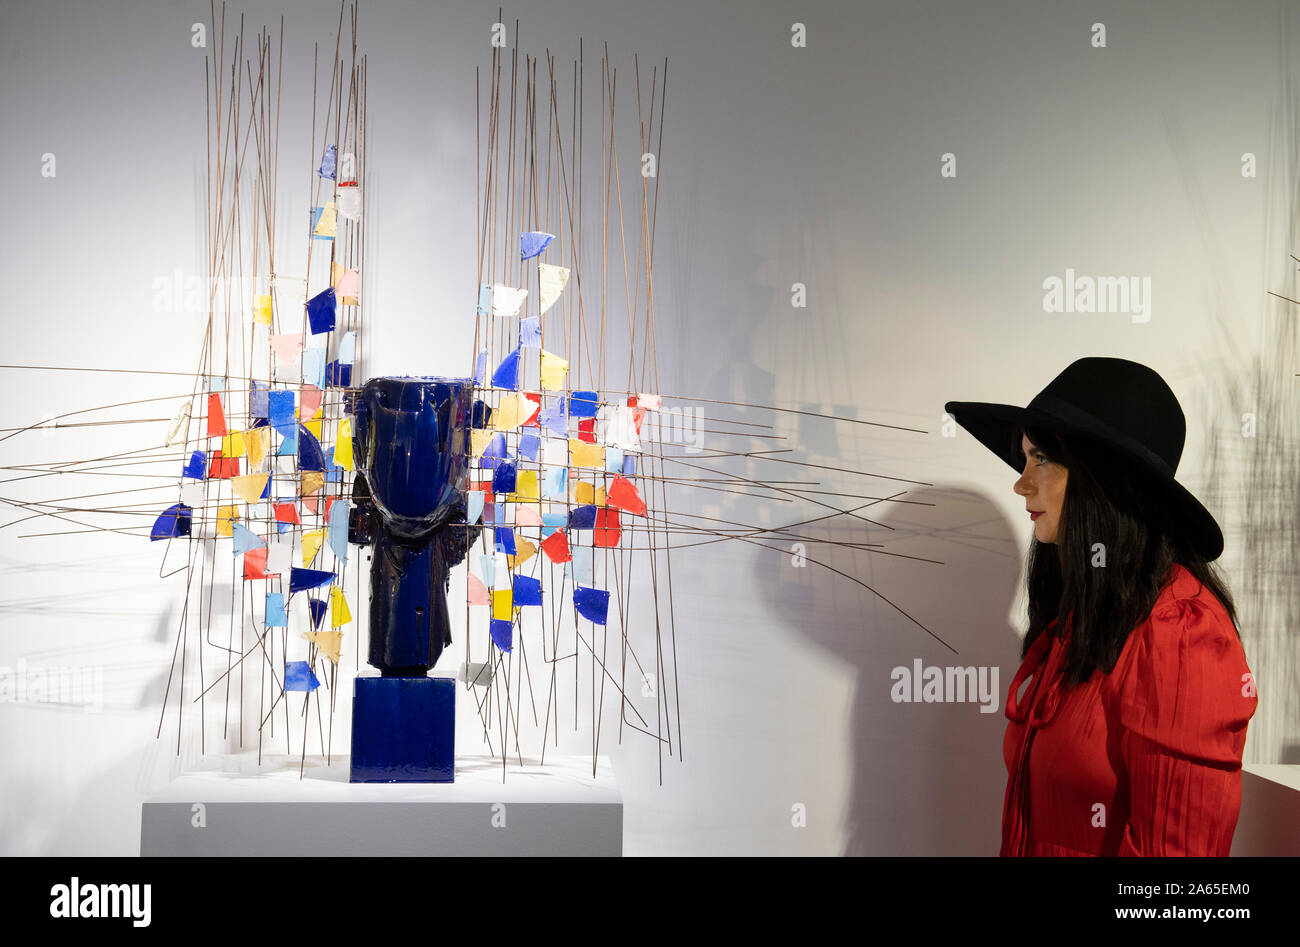 Opera Gallery, New Bond Street, London, UK. 24th October 2019. Manolo Valdes is one of the most influential Spanish contemporary artists, and one of the most revolutionary creative forces in his home country. Image: Cabeza Azul con Resina Roja, 2018. Credit: Malcolm Park/Alamy Live News. Stock Photo